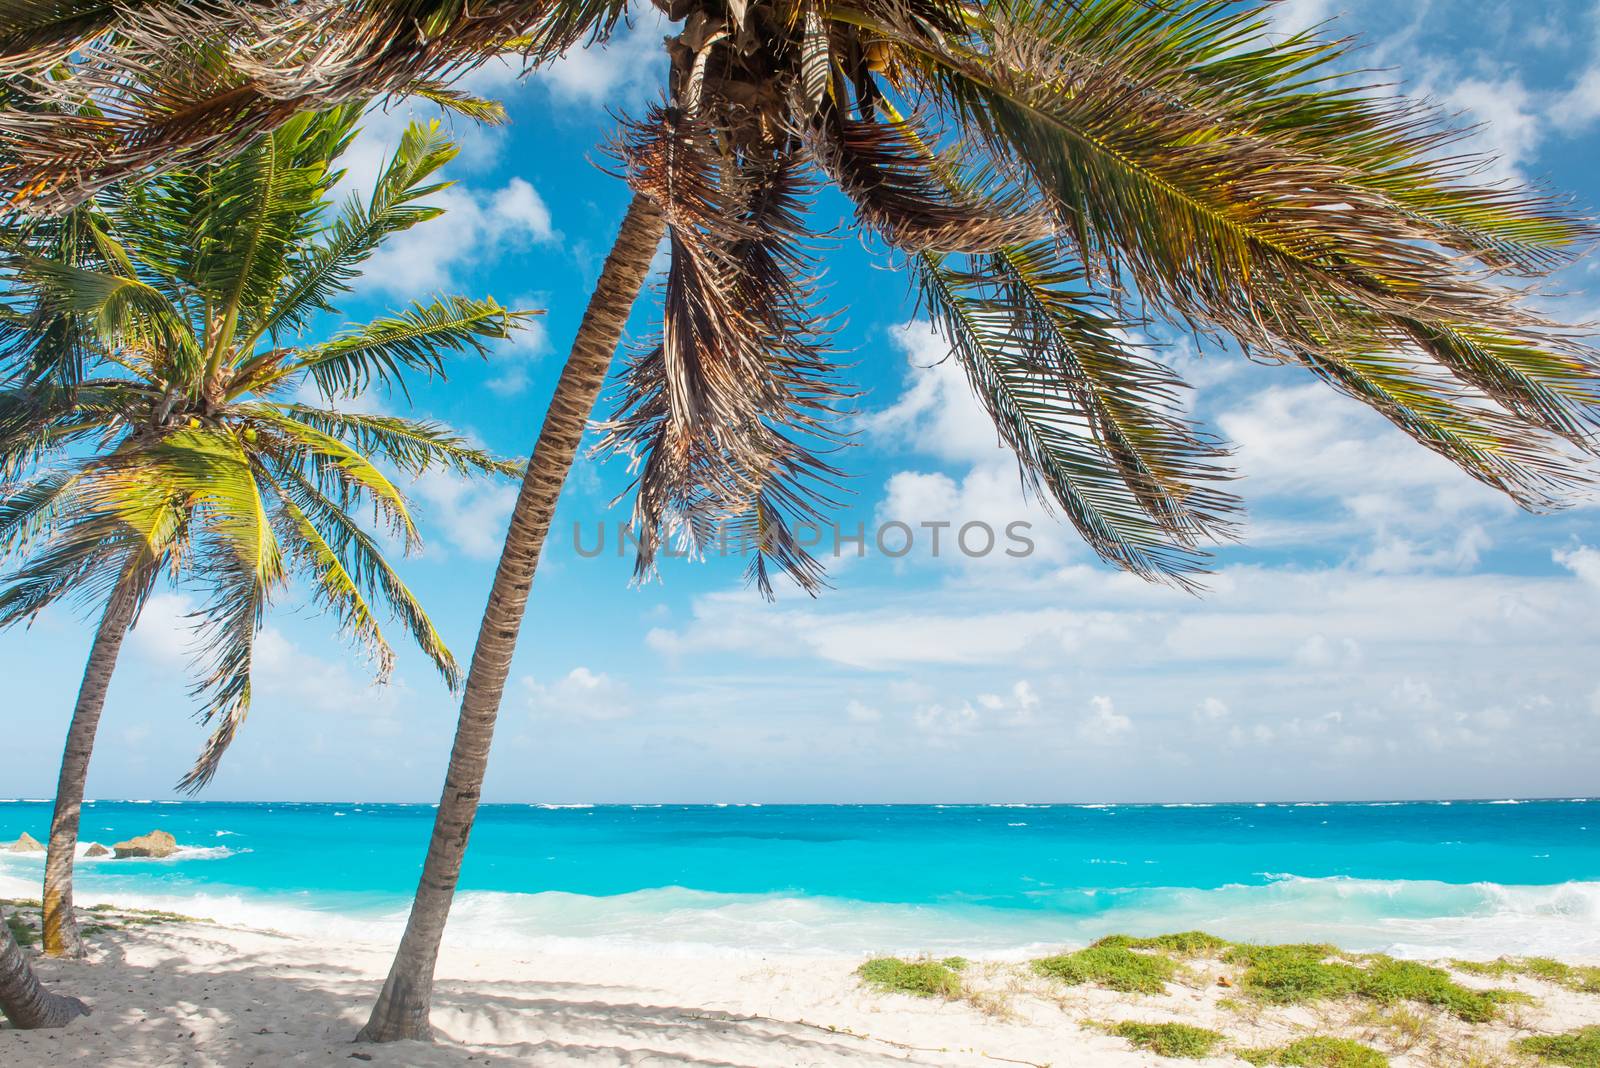 Palms on the white beach and a turquoise sea on a Caribbean island of Barbados